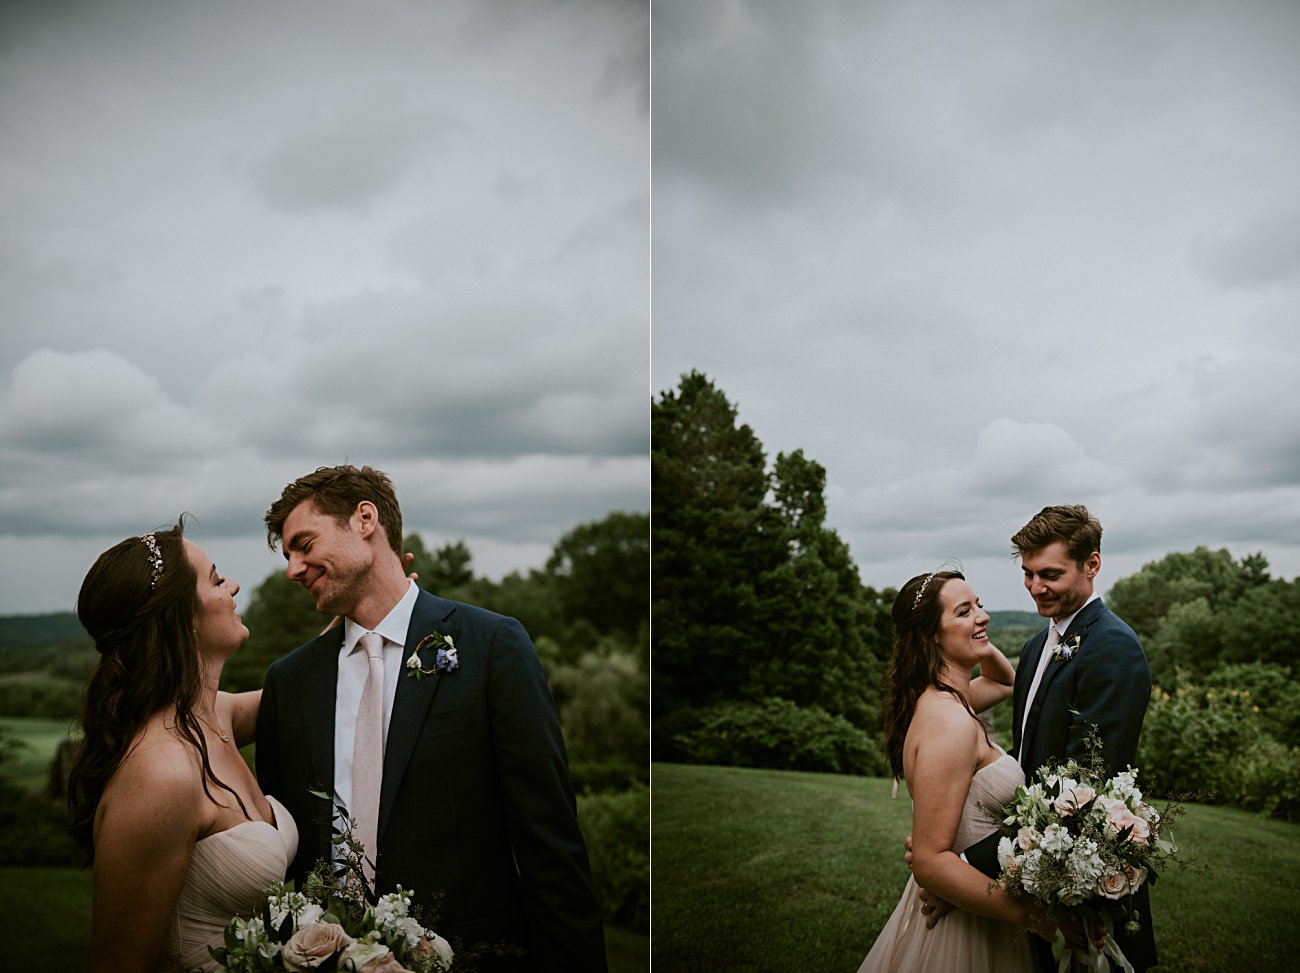 Bride and Groom Photos, Couples photos on wedding days, Stormy sky's, Blush wedding gown, Backyard Hilltop Wedding in Spring Green Wisconsin, Madison WI Wedding Photographer